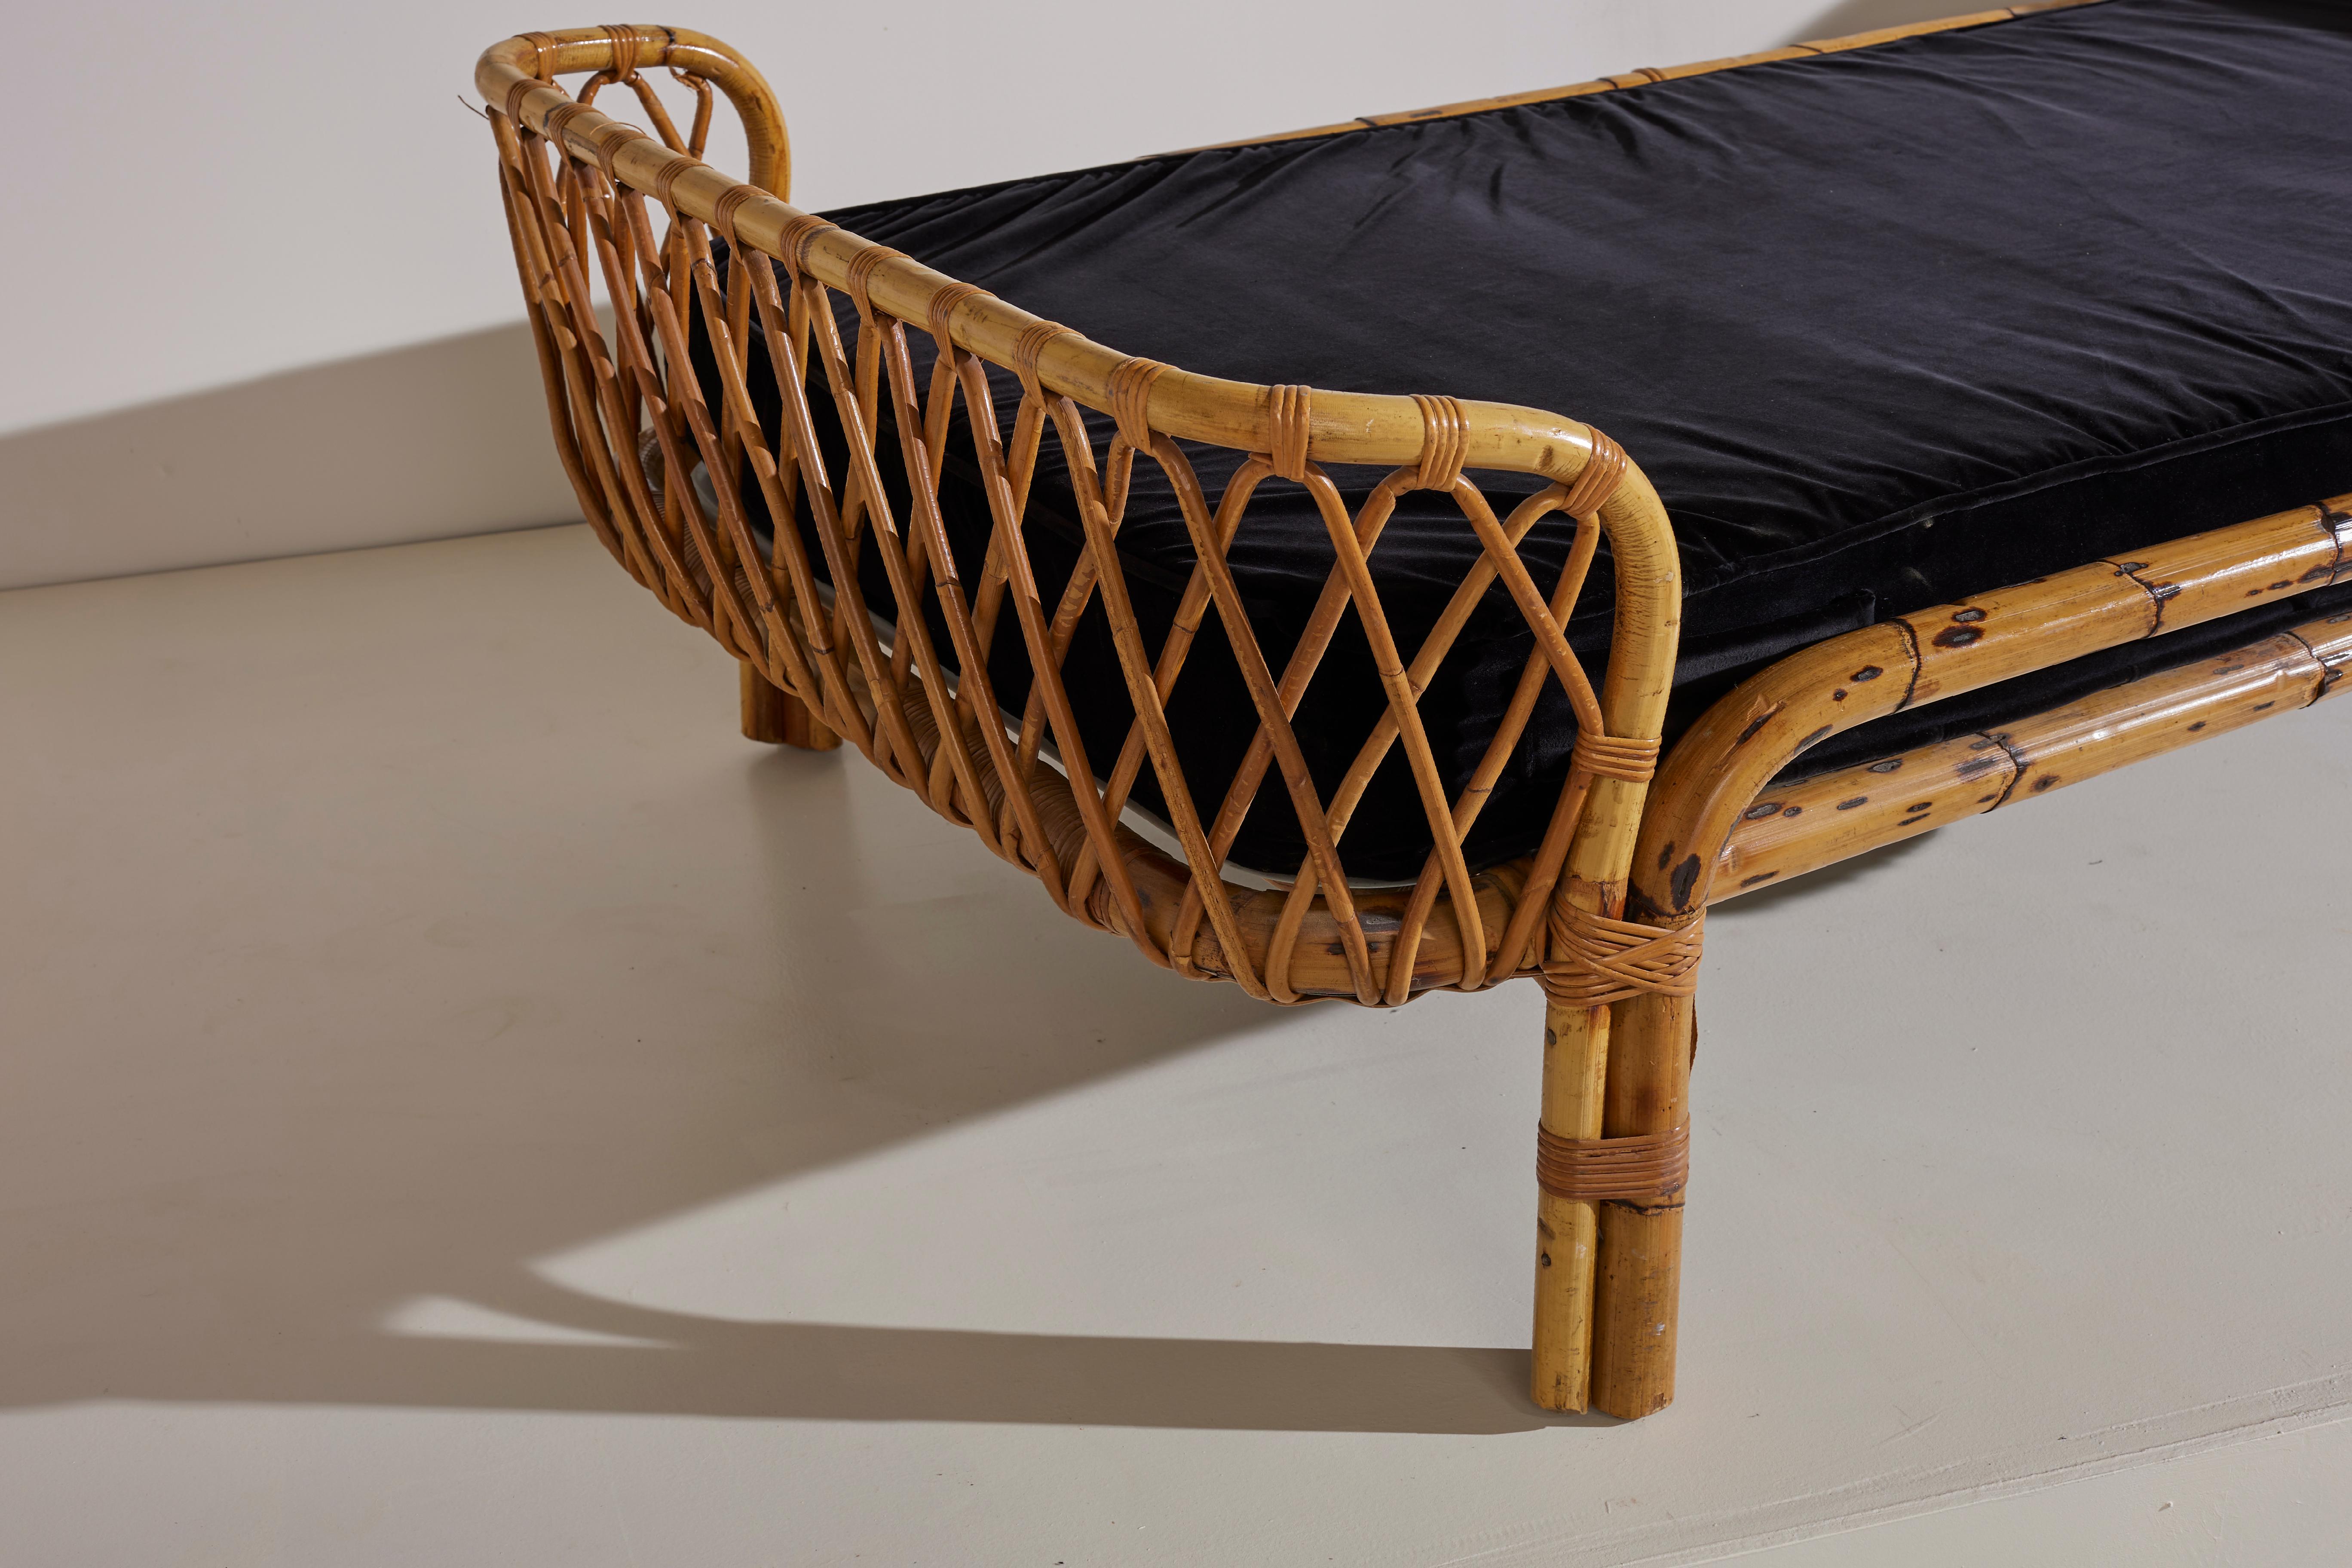 A beautiful daybed designed and produced by Bonacina in the 1960s.
In its original excellent vintage condition with a great patina.

Dimensions: 207x102x65cm (DxWxH).